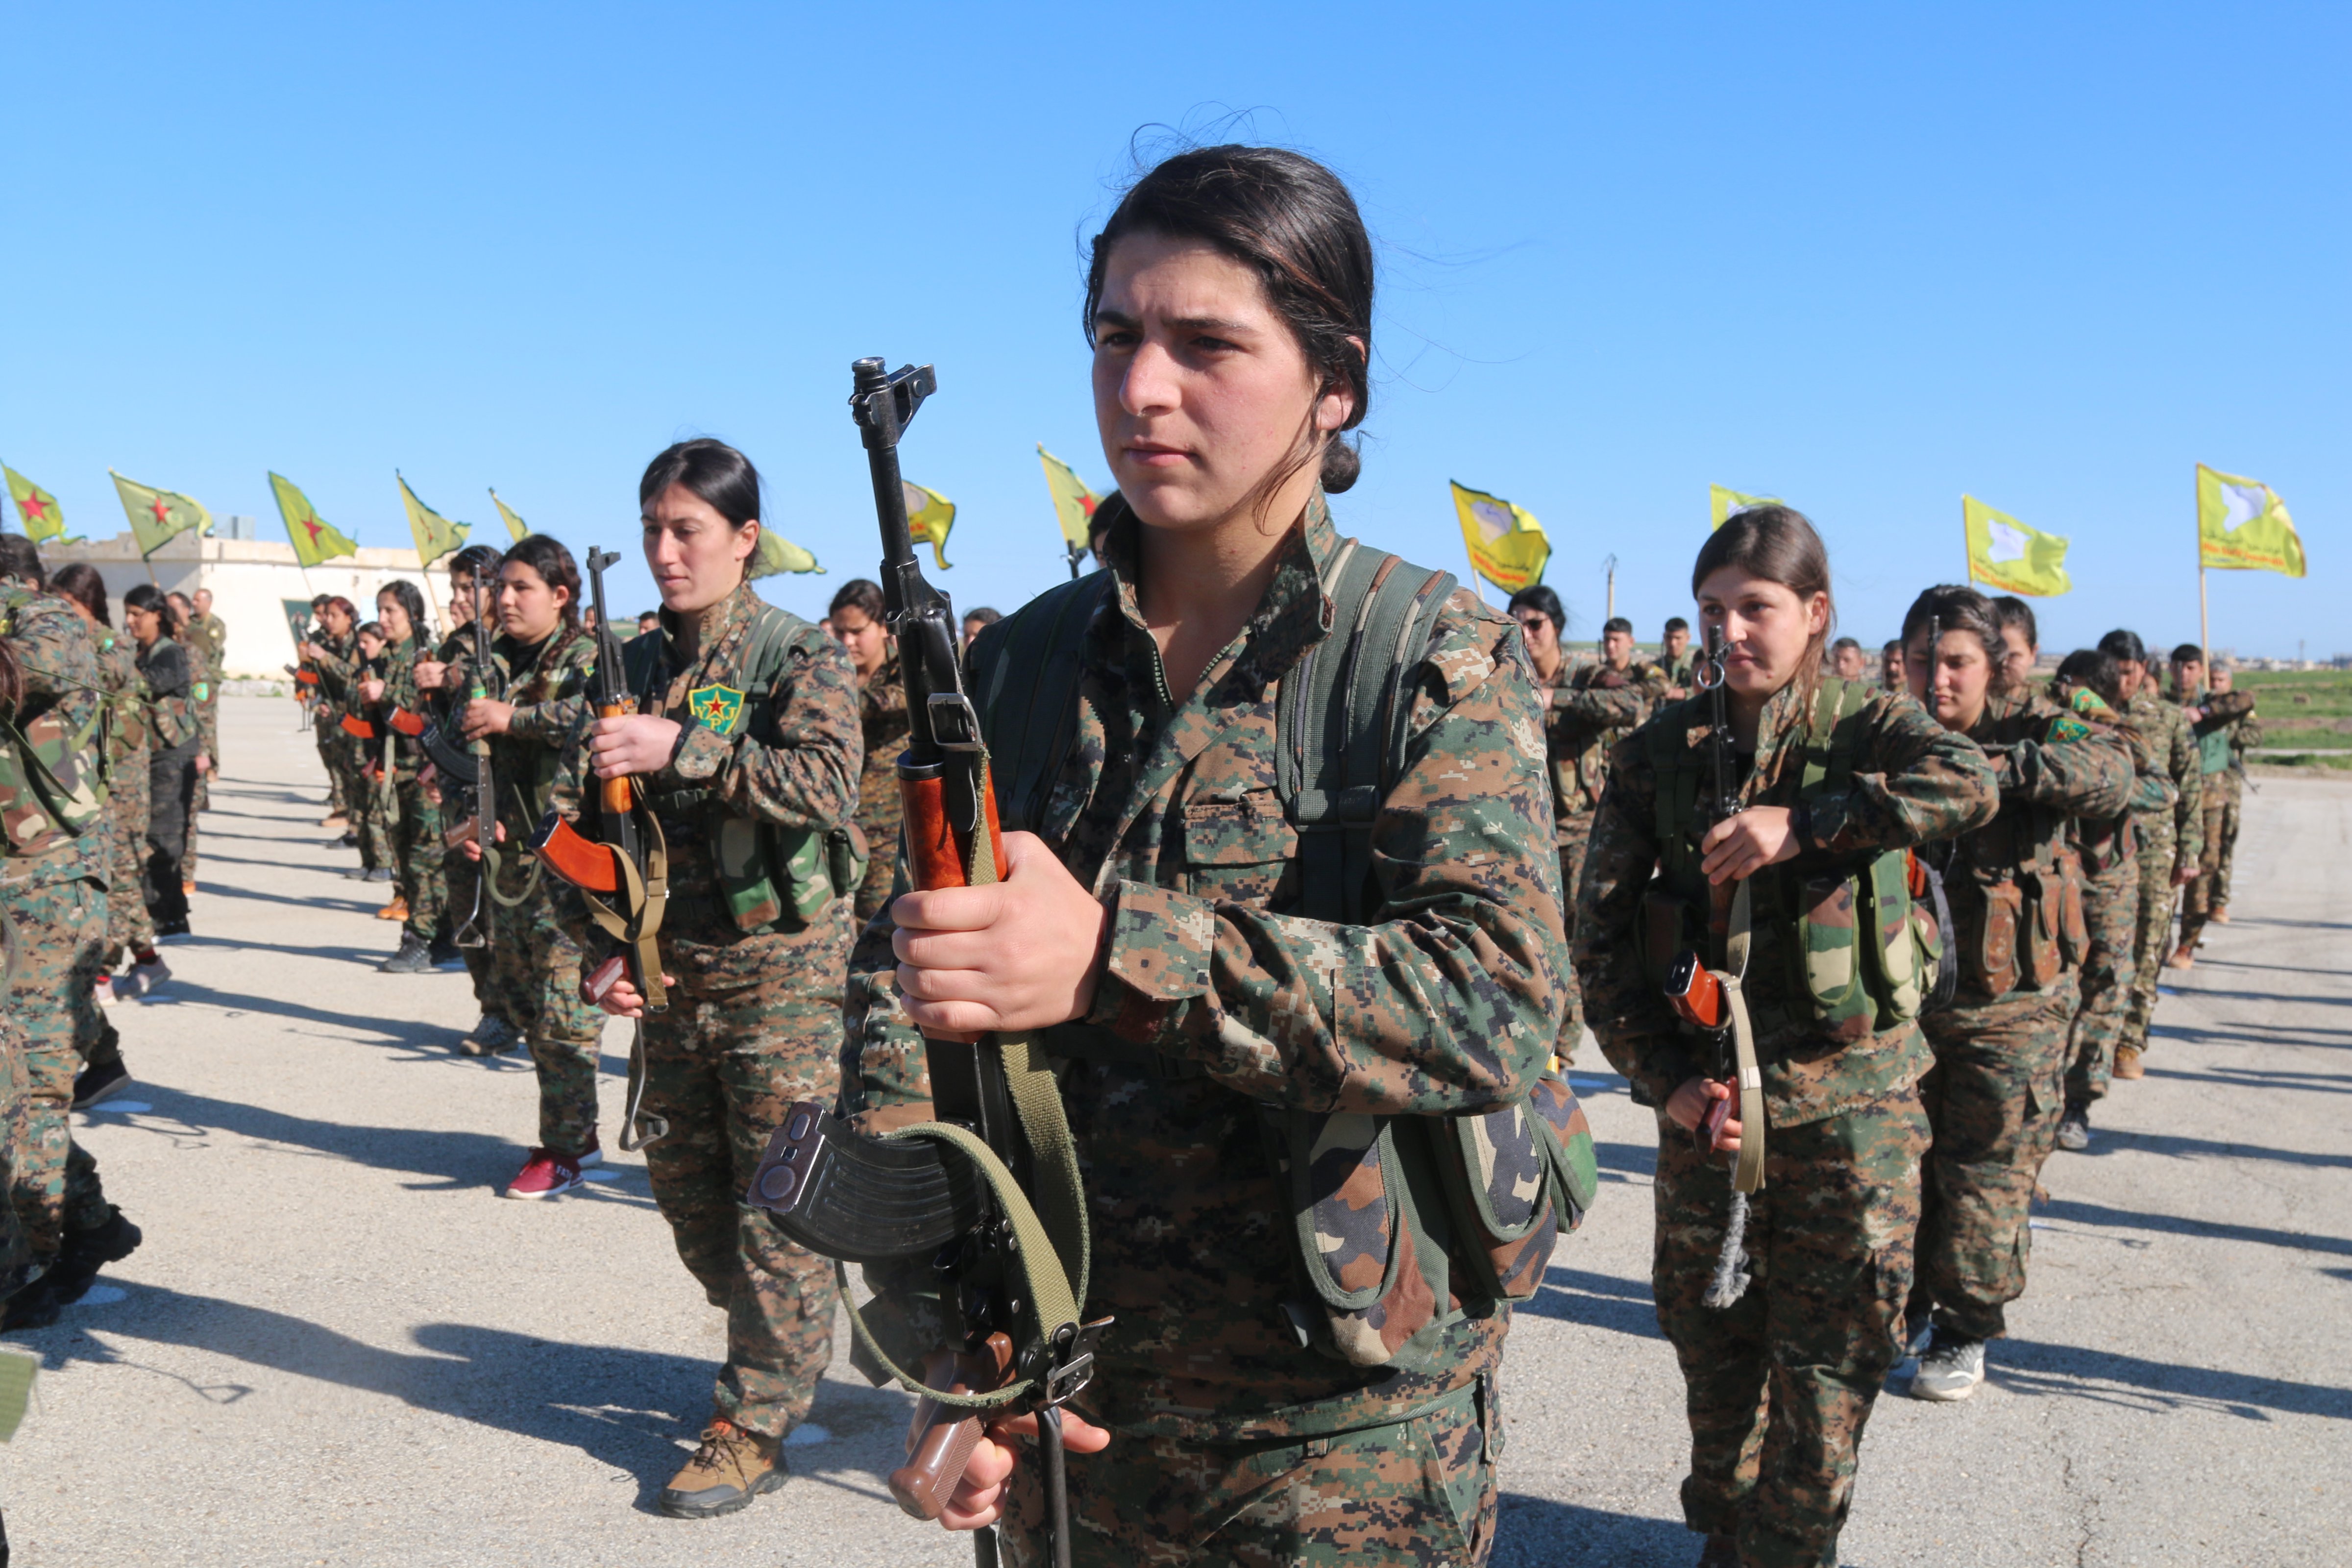 Members of the Women's Protection Units in northeast Syria in July 2018. (Courtesy of Members of the Women’s Protection Units)